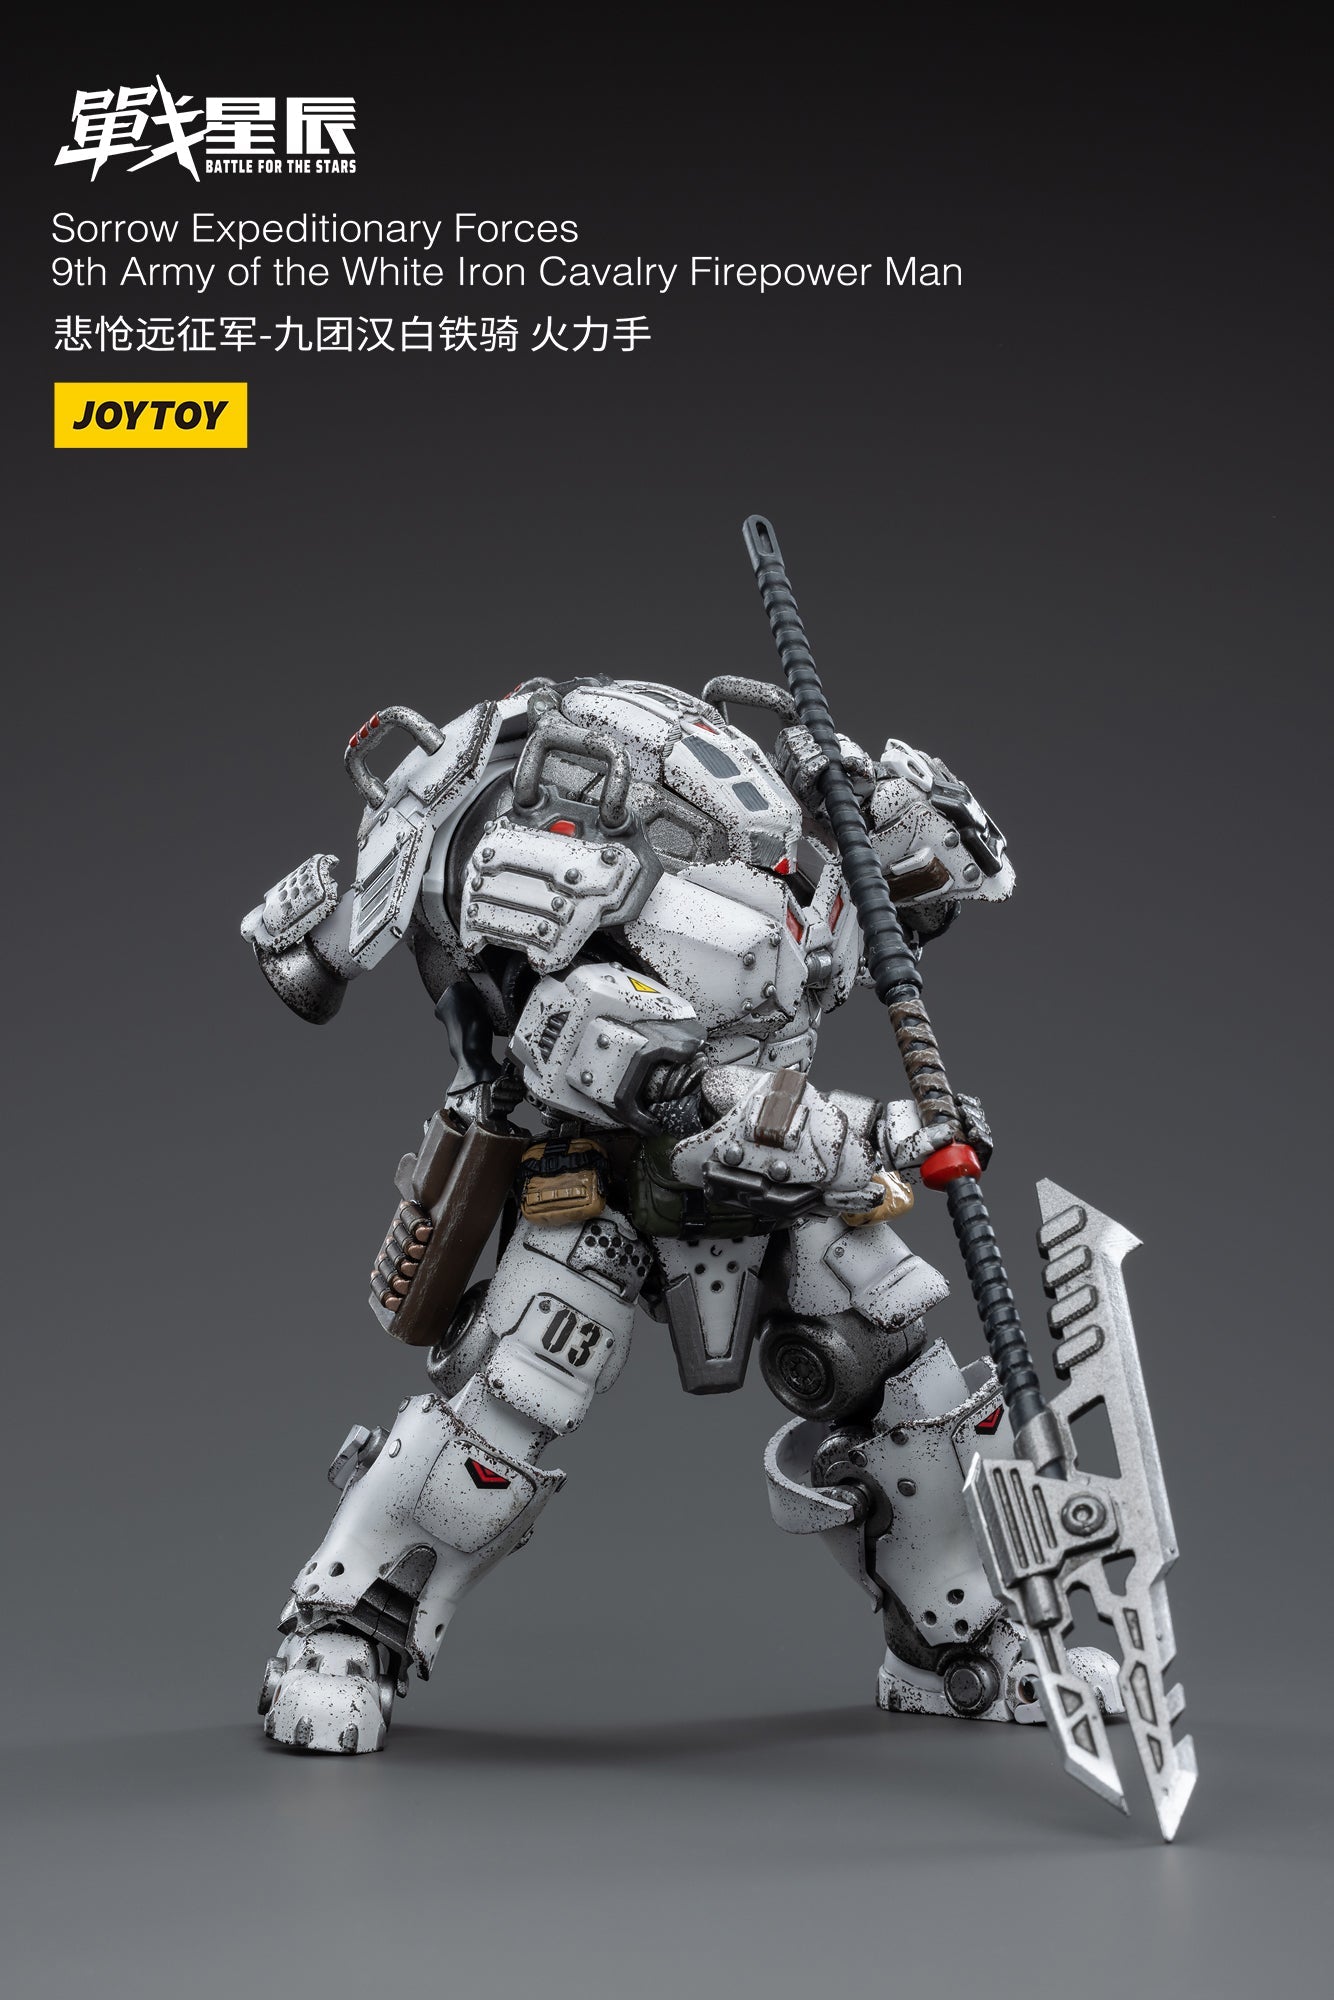 From Joy Toy, this Sorrow Expeditionary Forces 9th Army of the White Iron Cavalry Firepower Man action figure is incredibly detailed in 1/18 scale. JoyToy figure is highly articulated and includes weapon accessories as well as interchangeable hands.